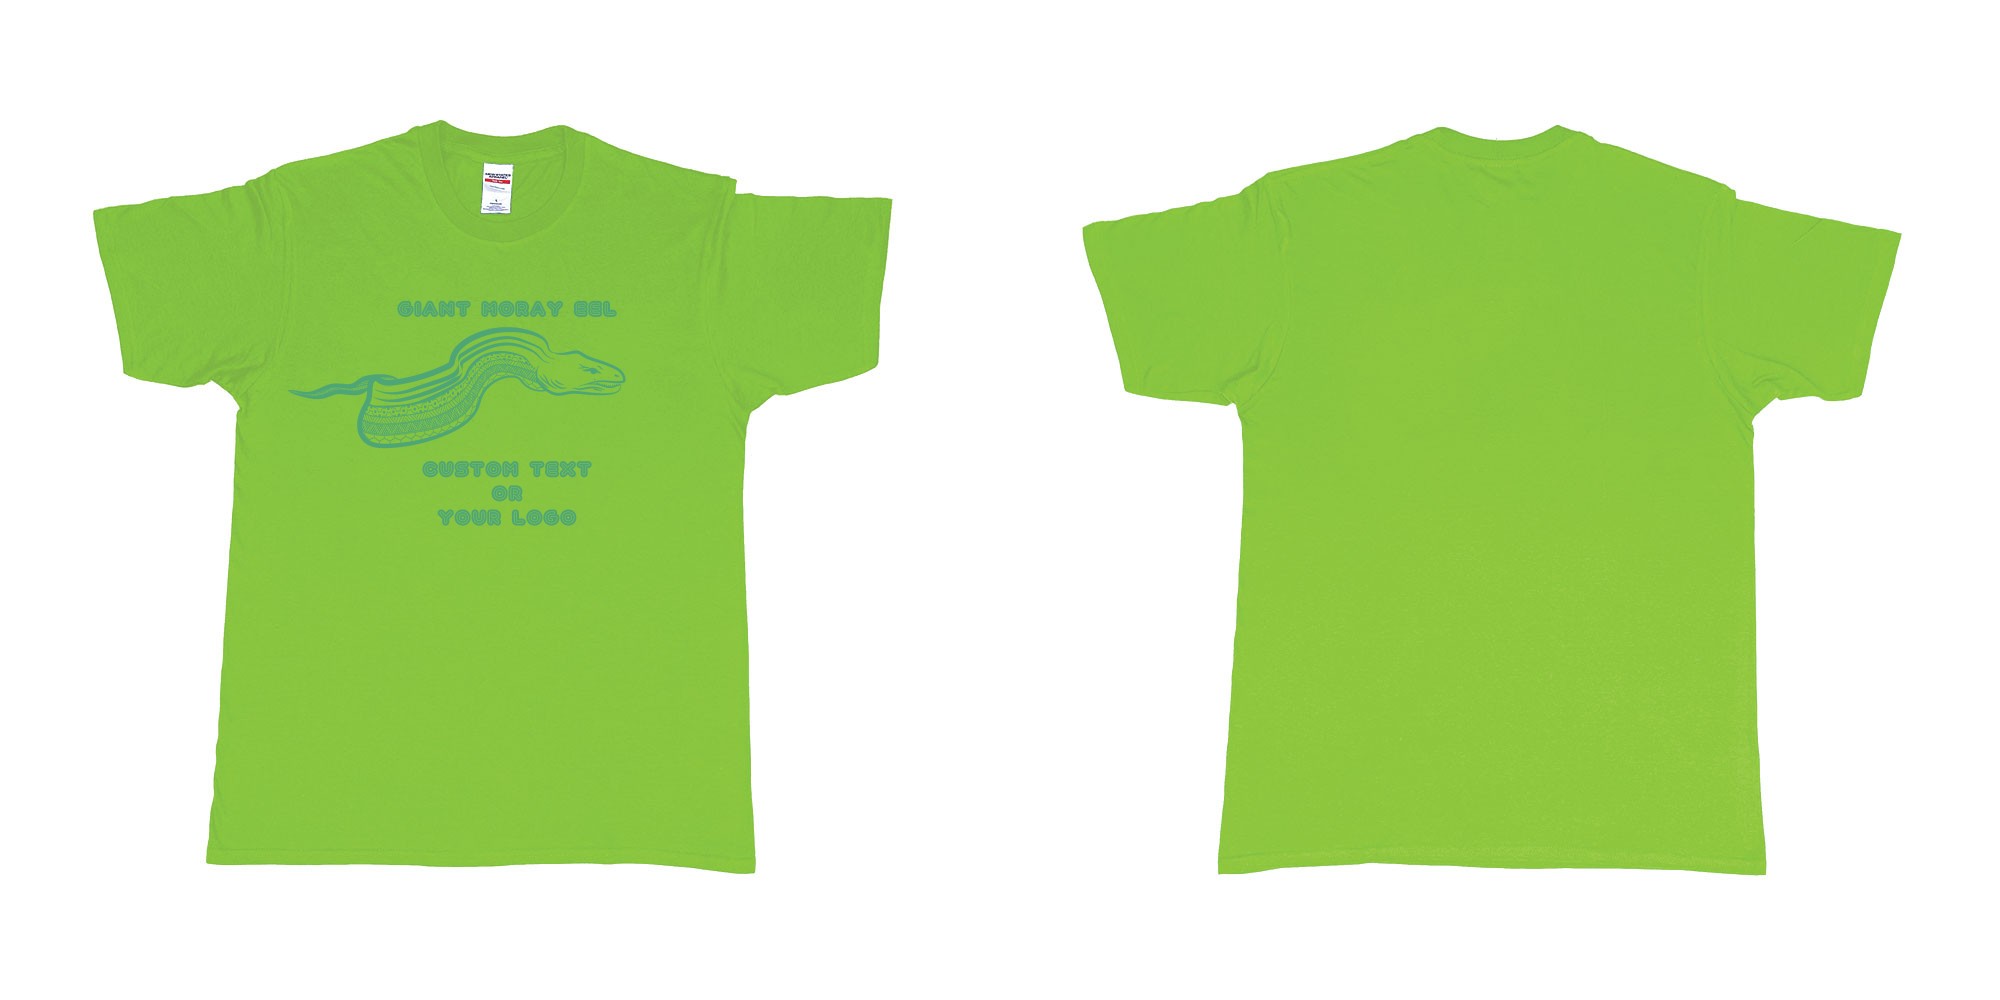 Custom tshirt design giant moray eel tribal in fabric color lime choice your own text made in Bali by The Pirate Way